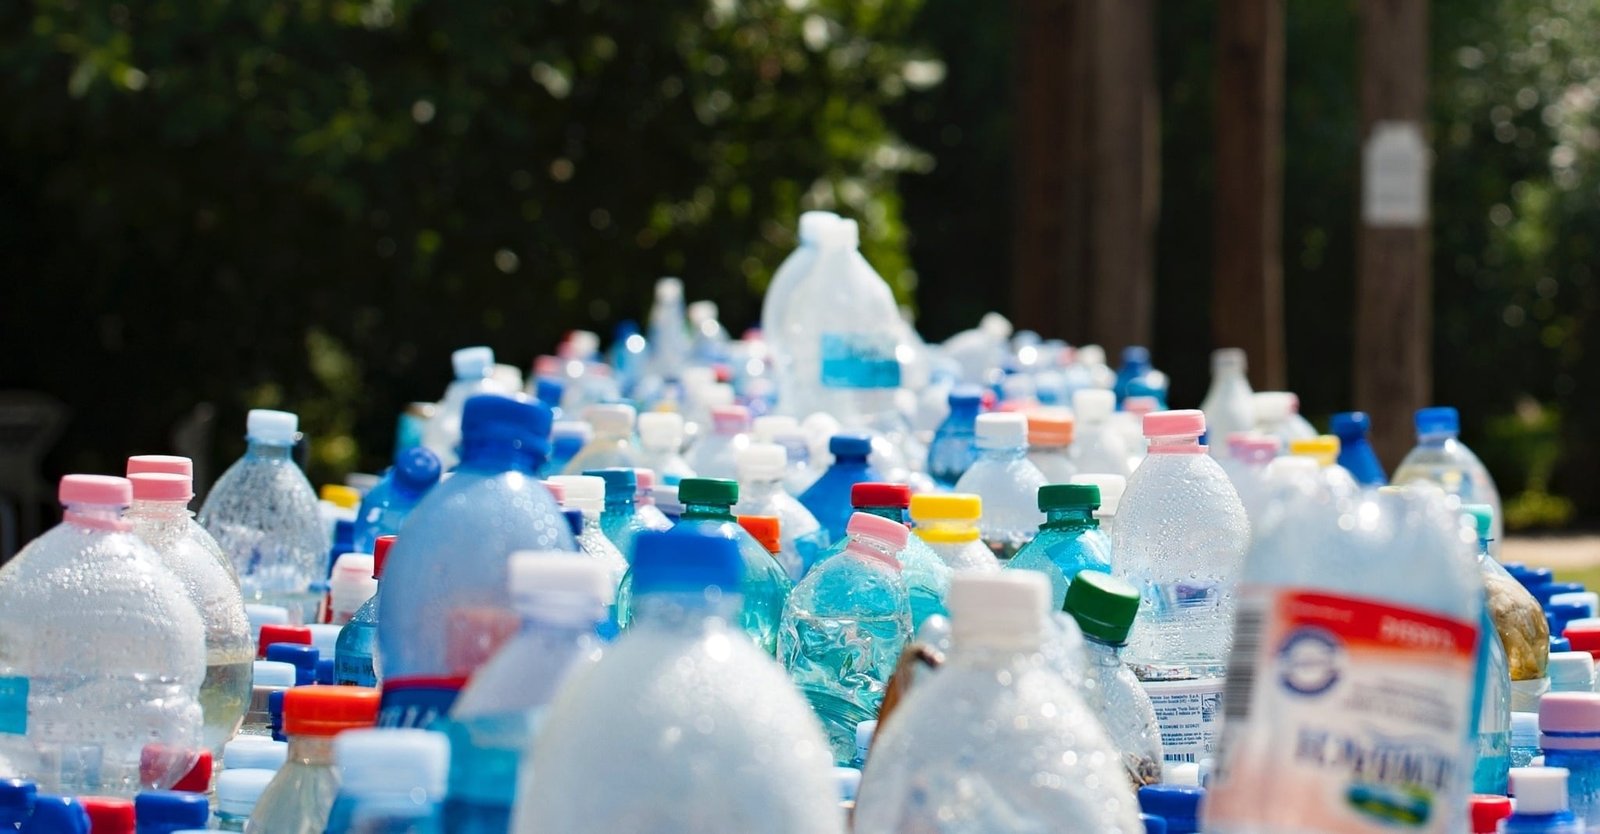 How To Make Money From Bottle Recycling?